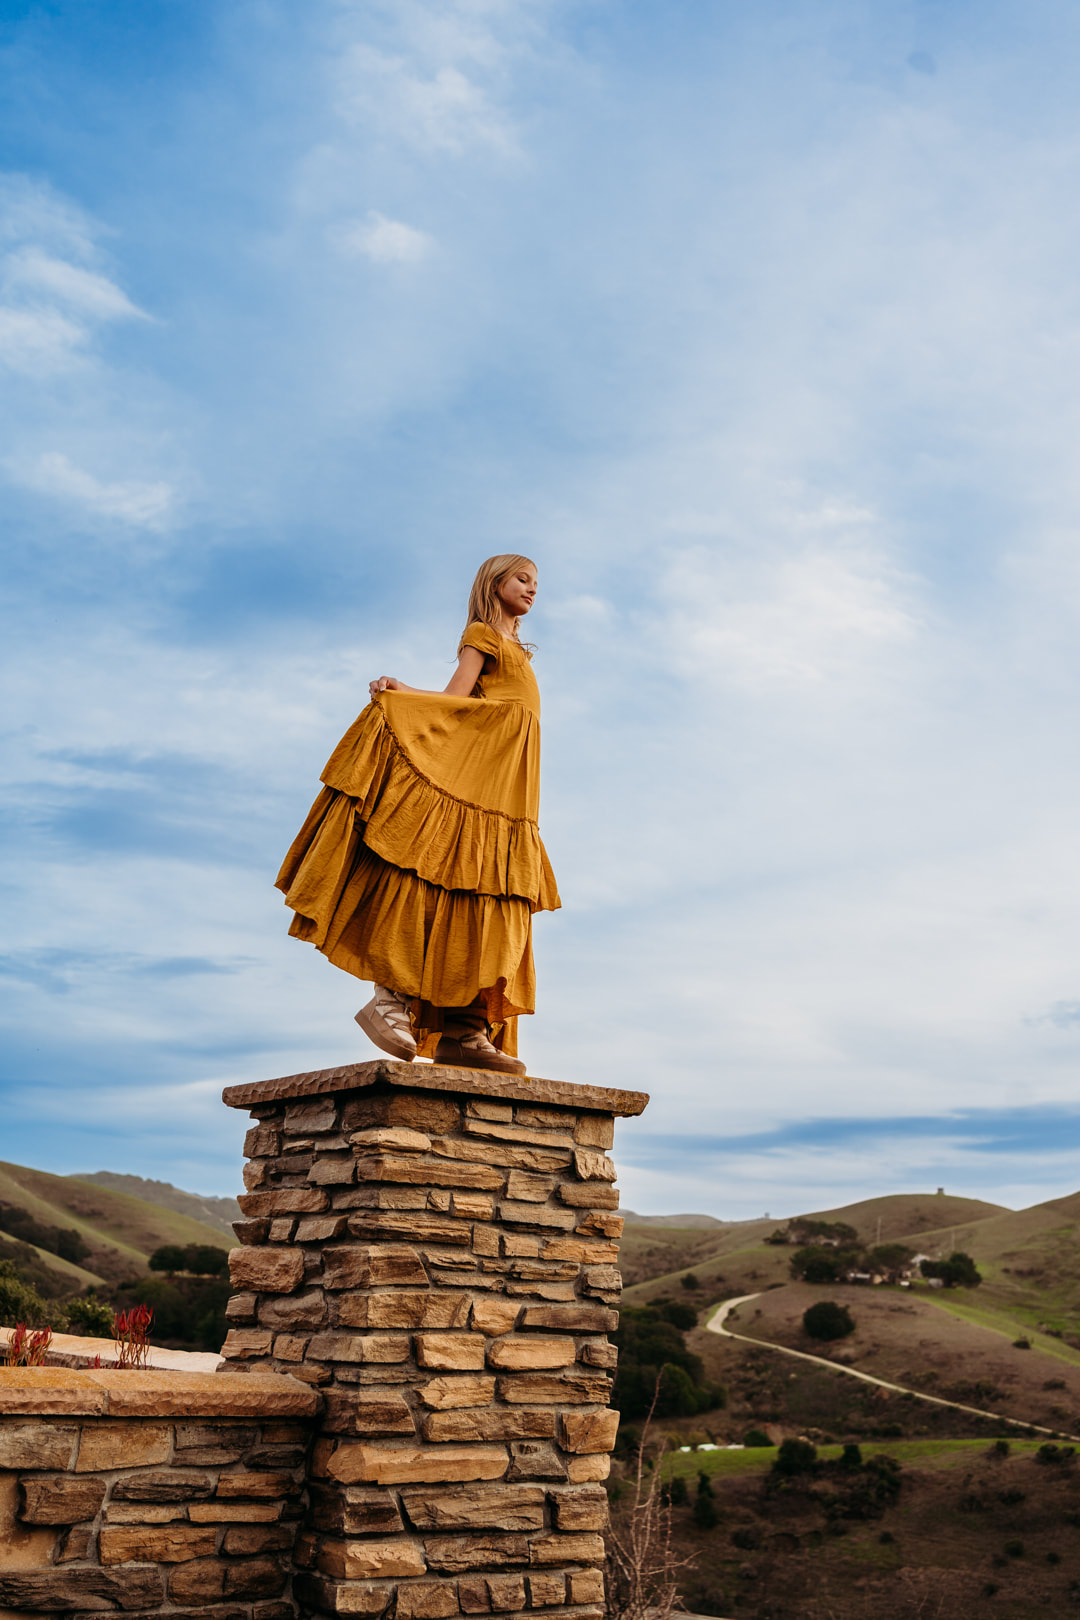 An 11 year old girl stands on a wall, holding the skirt of her ruffly dress against a blue sky.